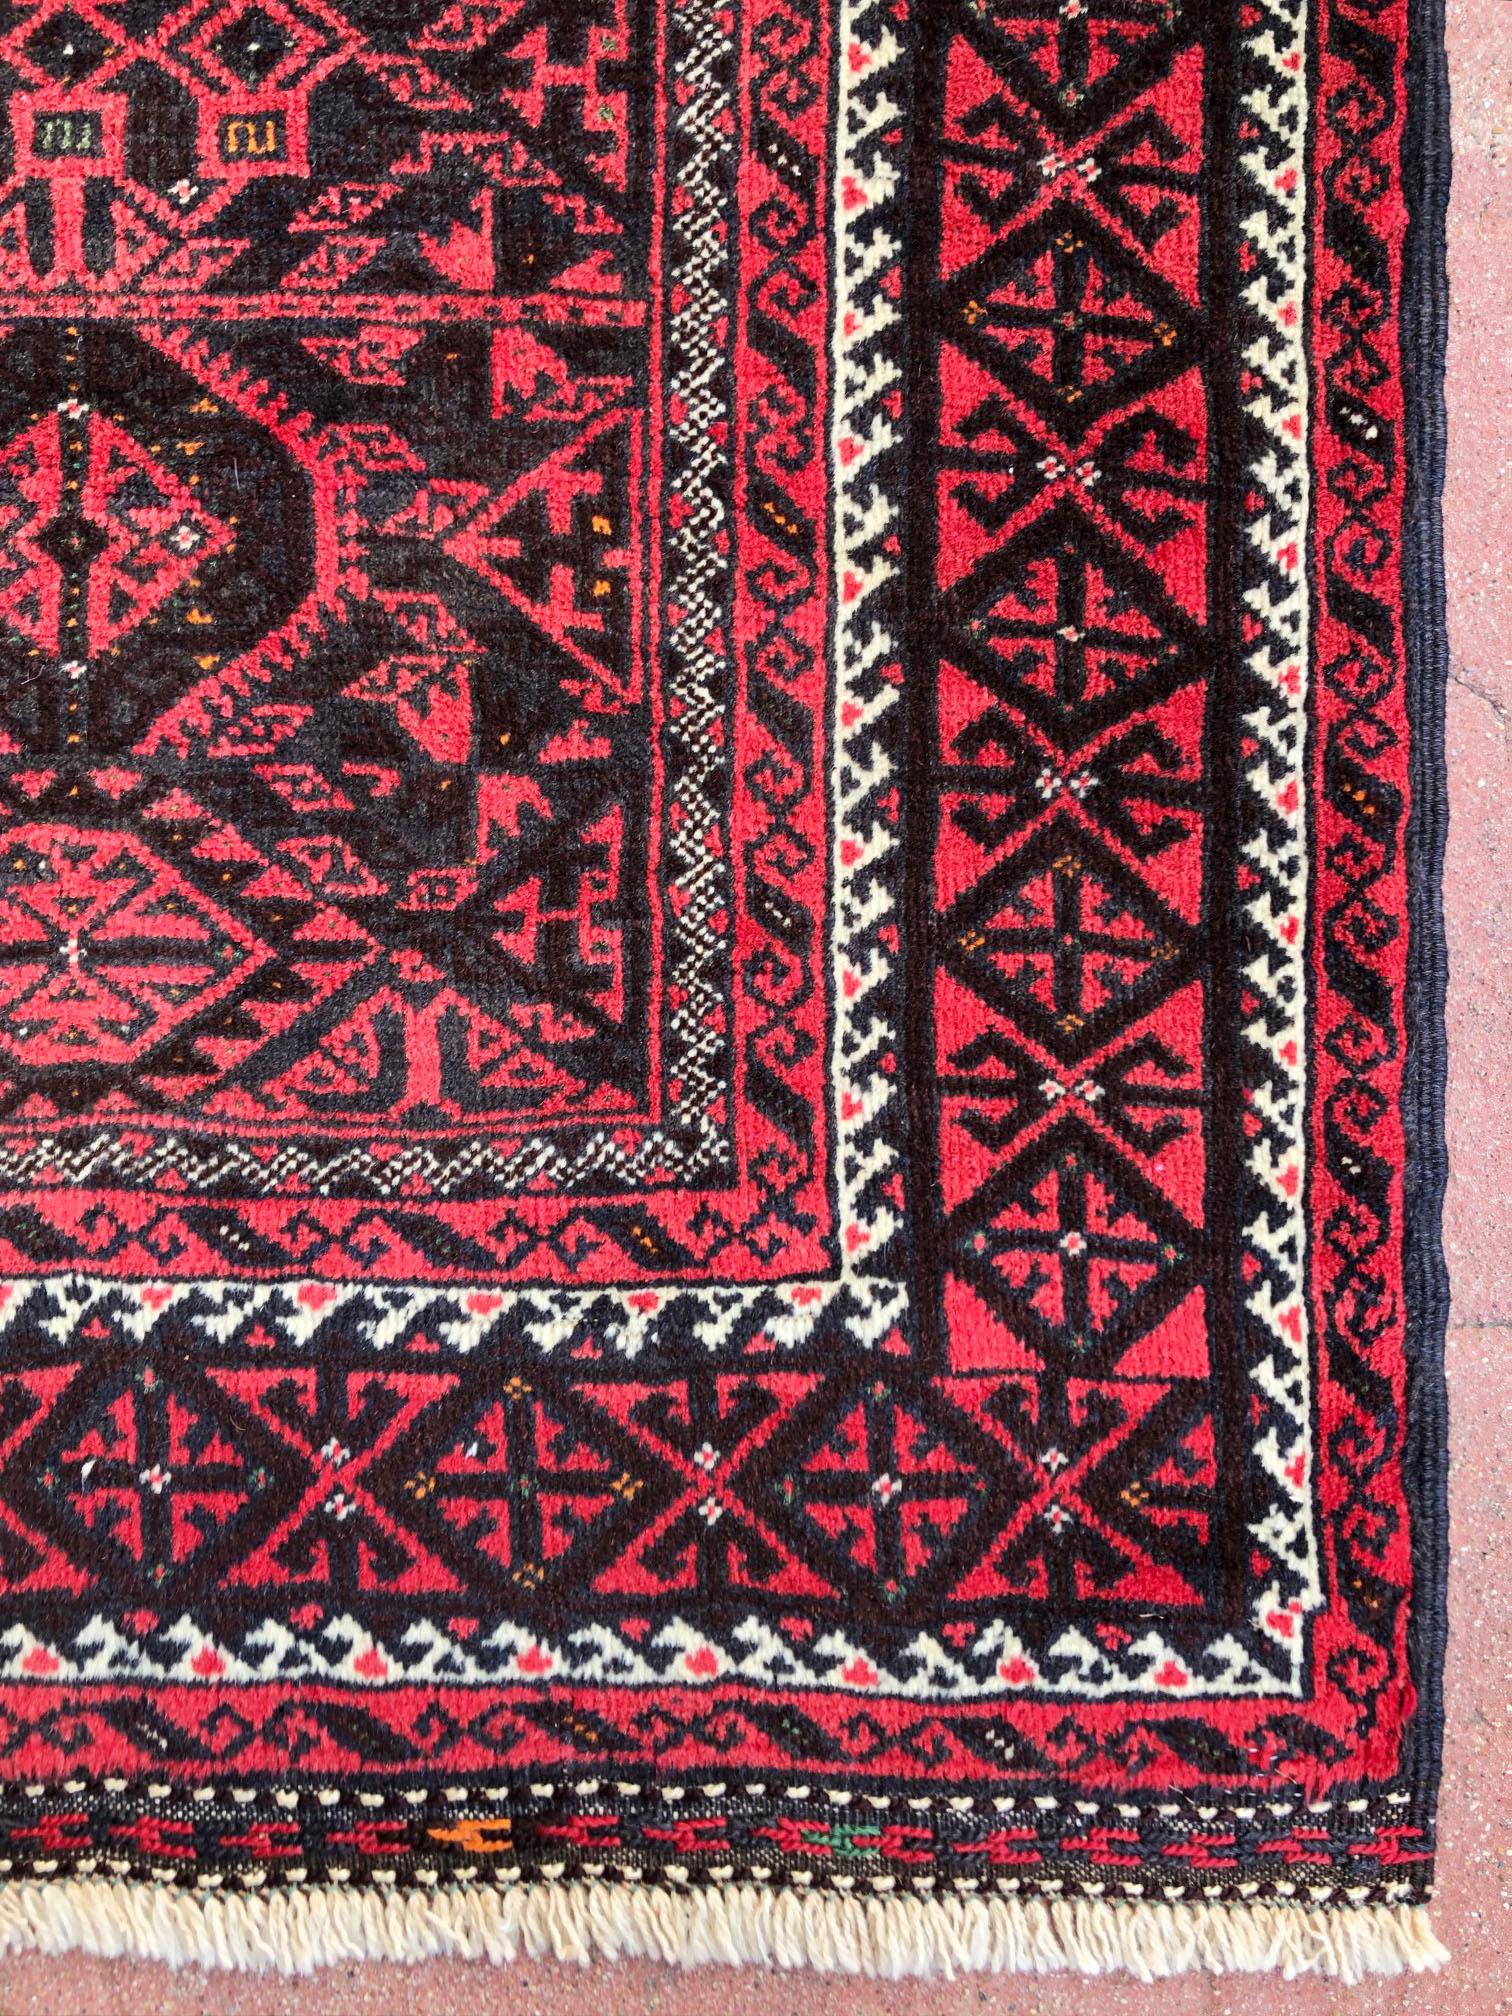 Authentic Persian Hand Knotted Geometric All-Over Red Black Baluchi Rug, 1960 In Good Condition For Sale In San Diego, CA